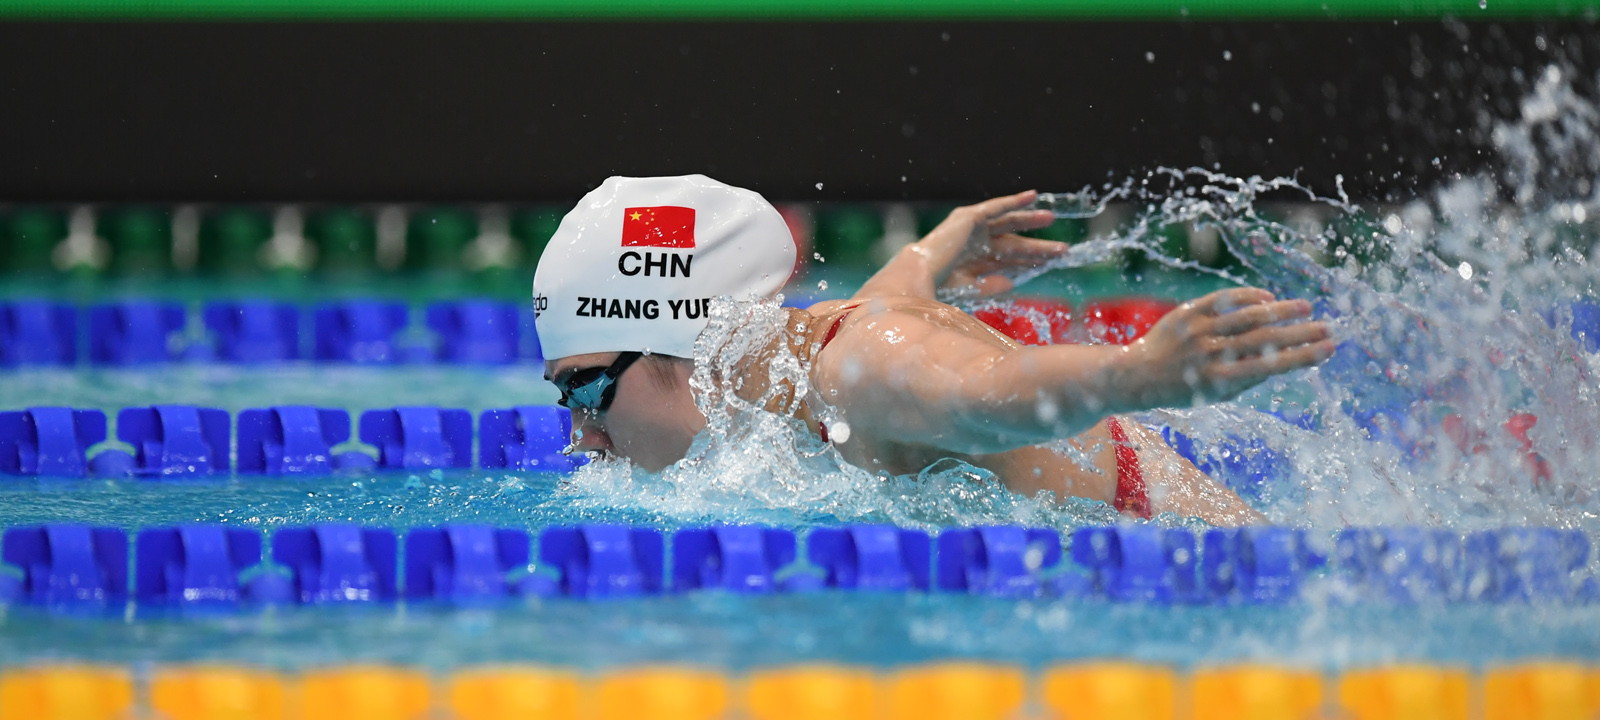 Olympic Champion Zhang Yufei Recaps 2022, Previews 2023 In New Vlog